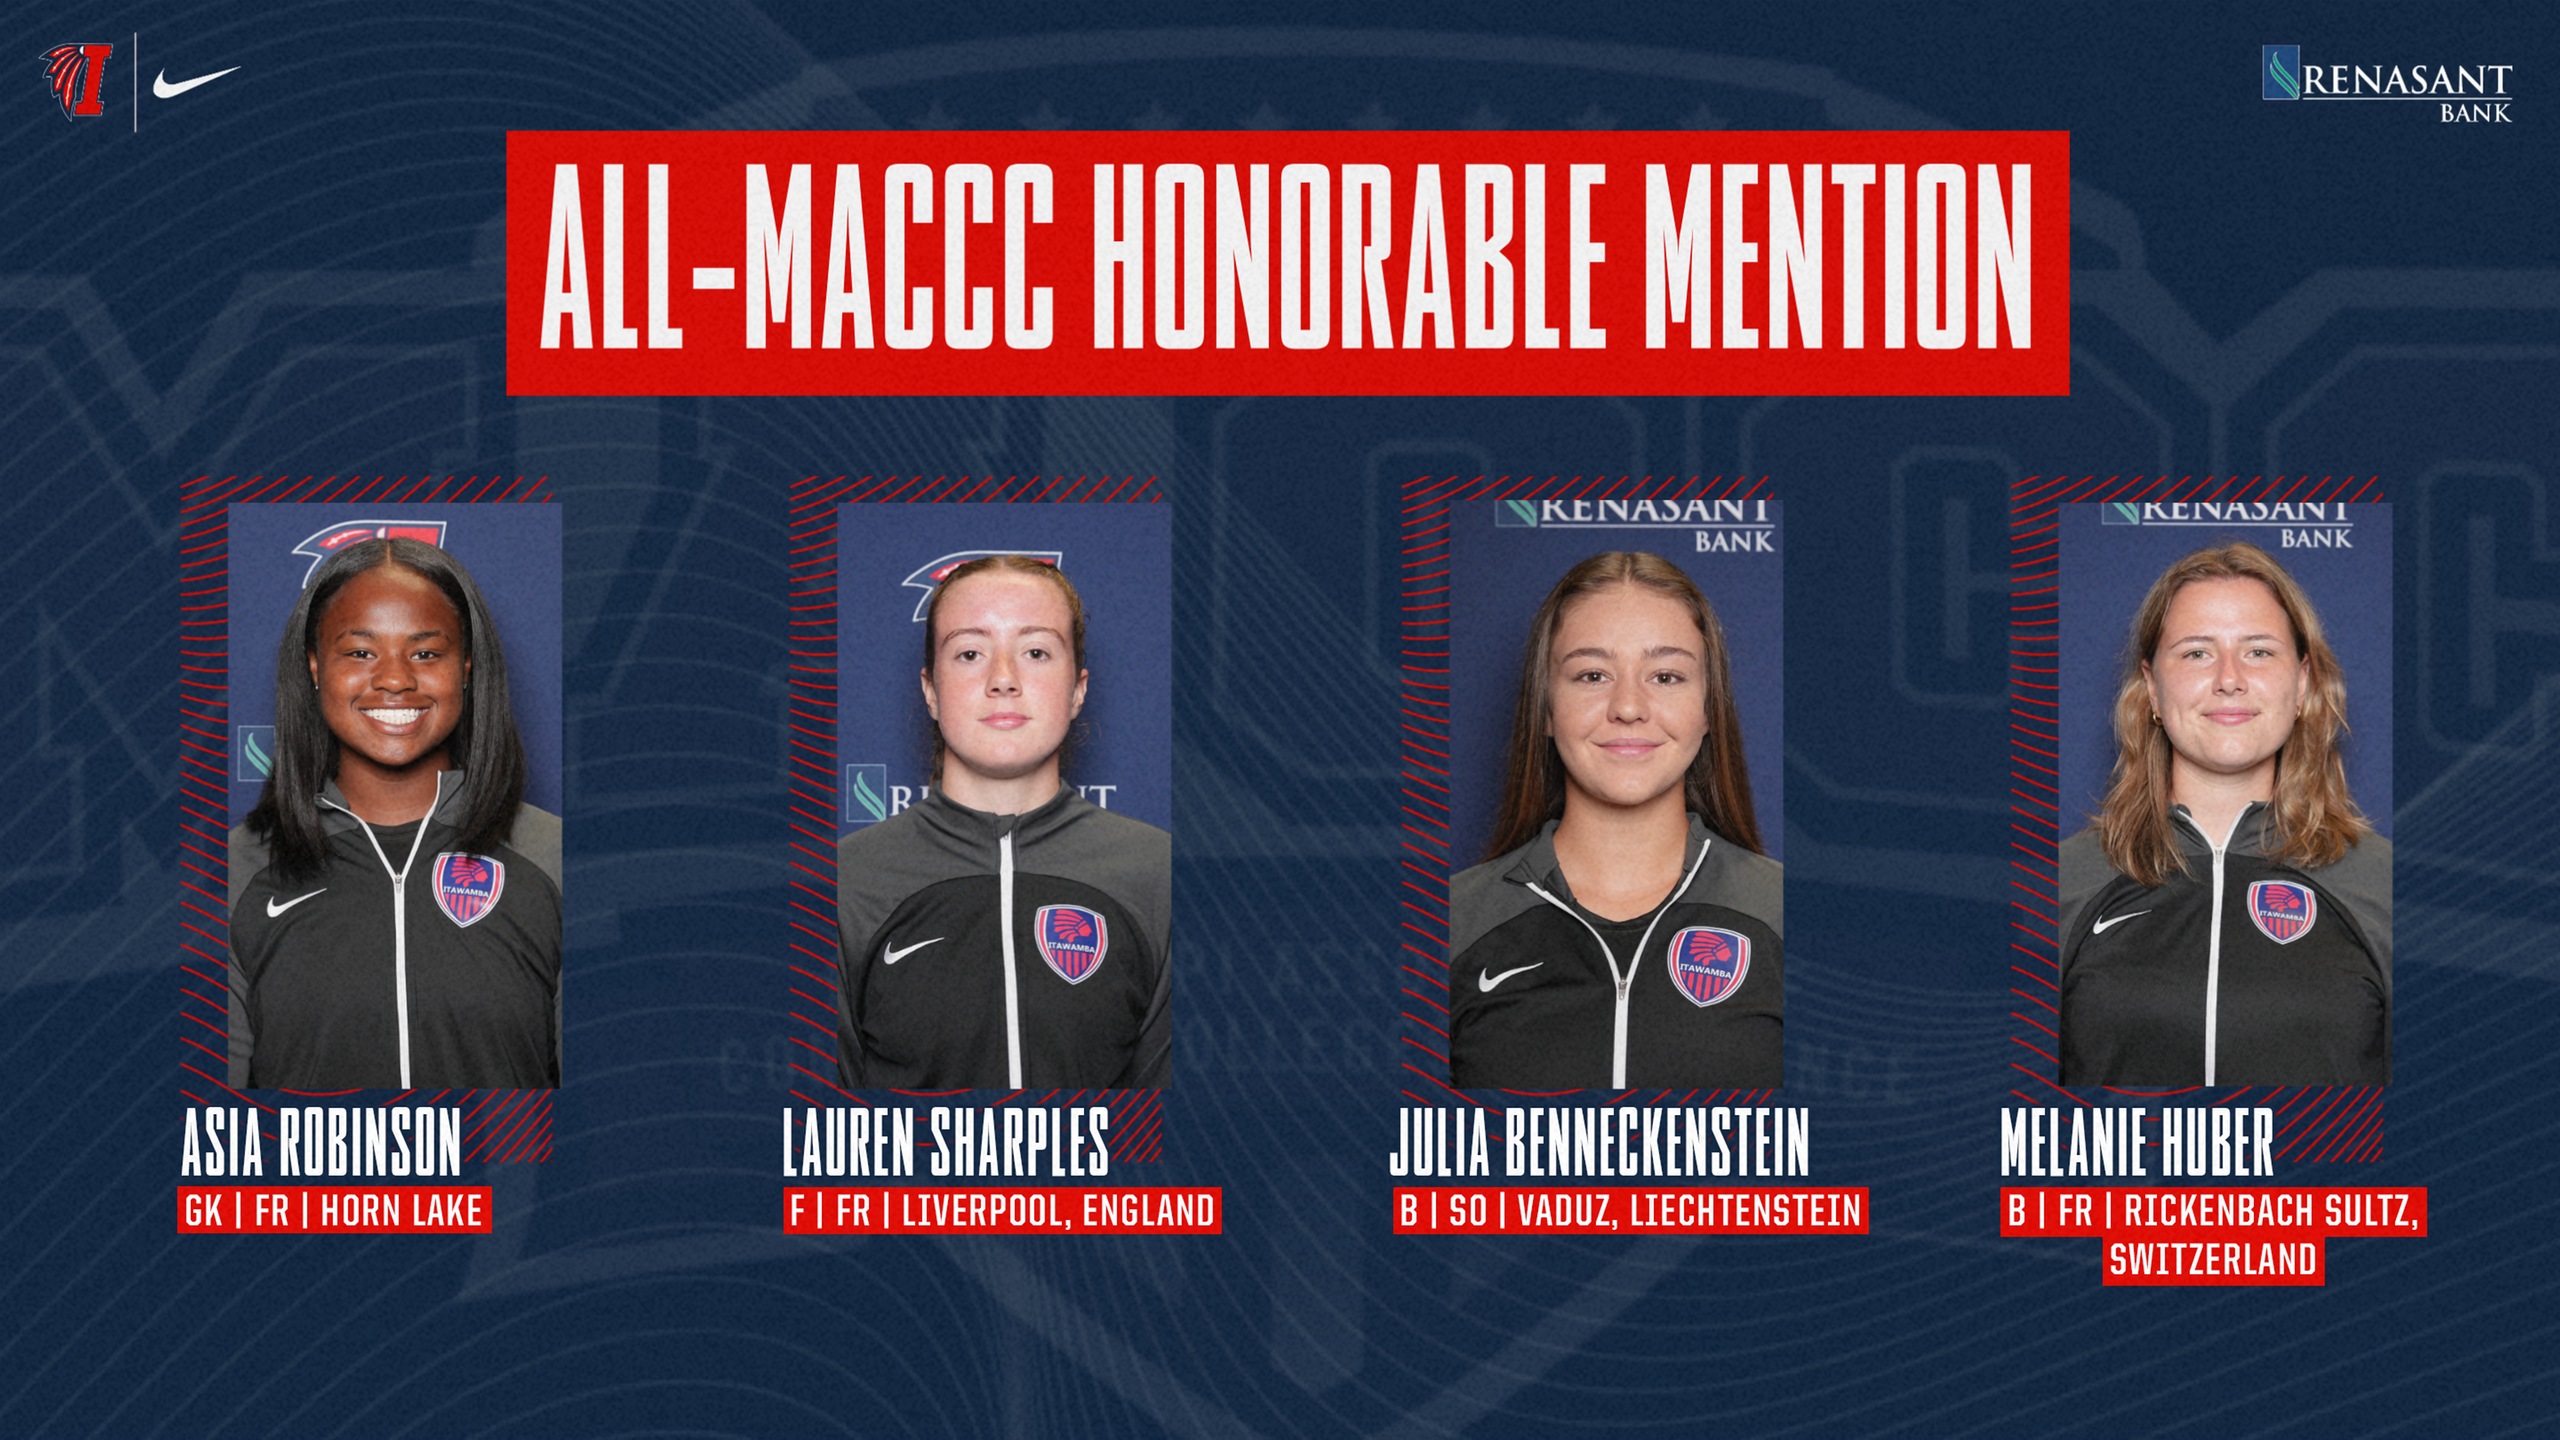 Four Lady Indians recognized in All-MACCC Honorable Mention